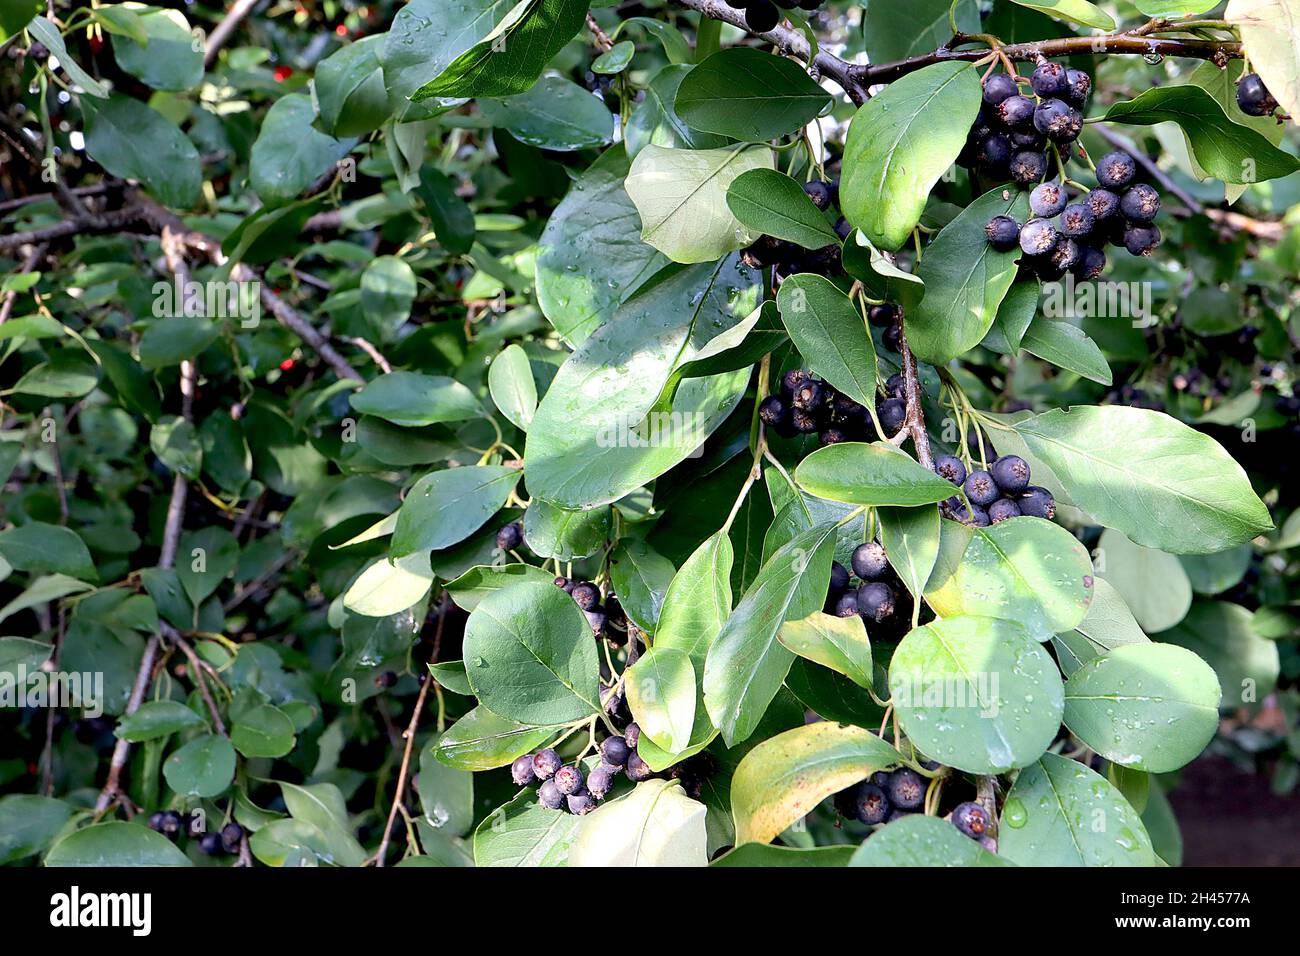 Cotoneaster affinis purpleberry cotoneaster – round purple black round berries and smooth glaucous leaves,  October, England, UK Stock Photo